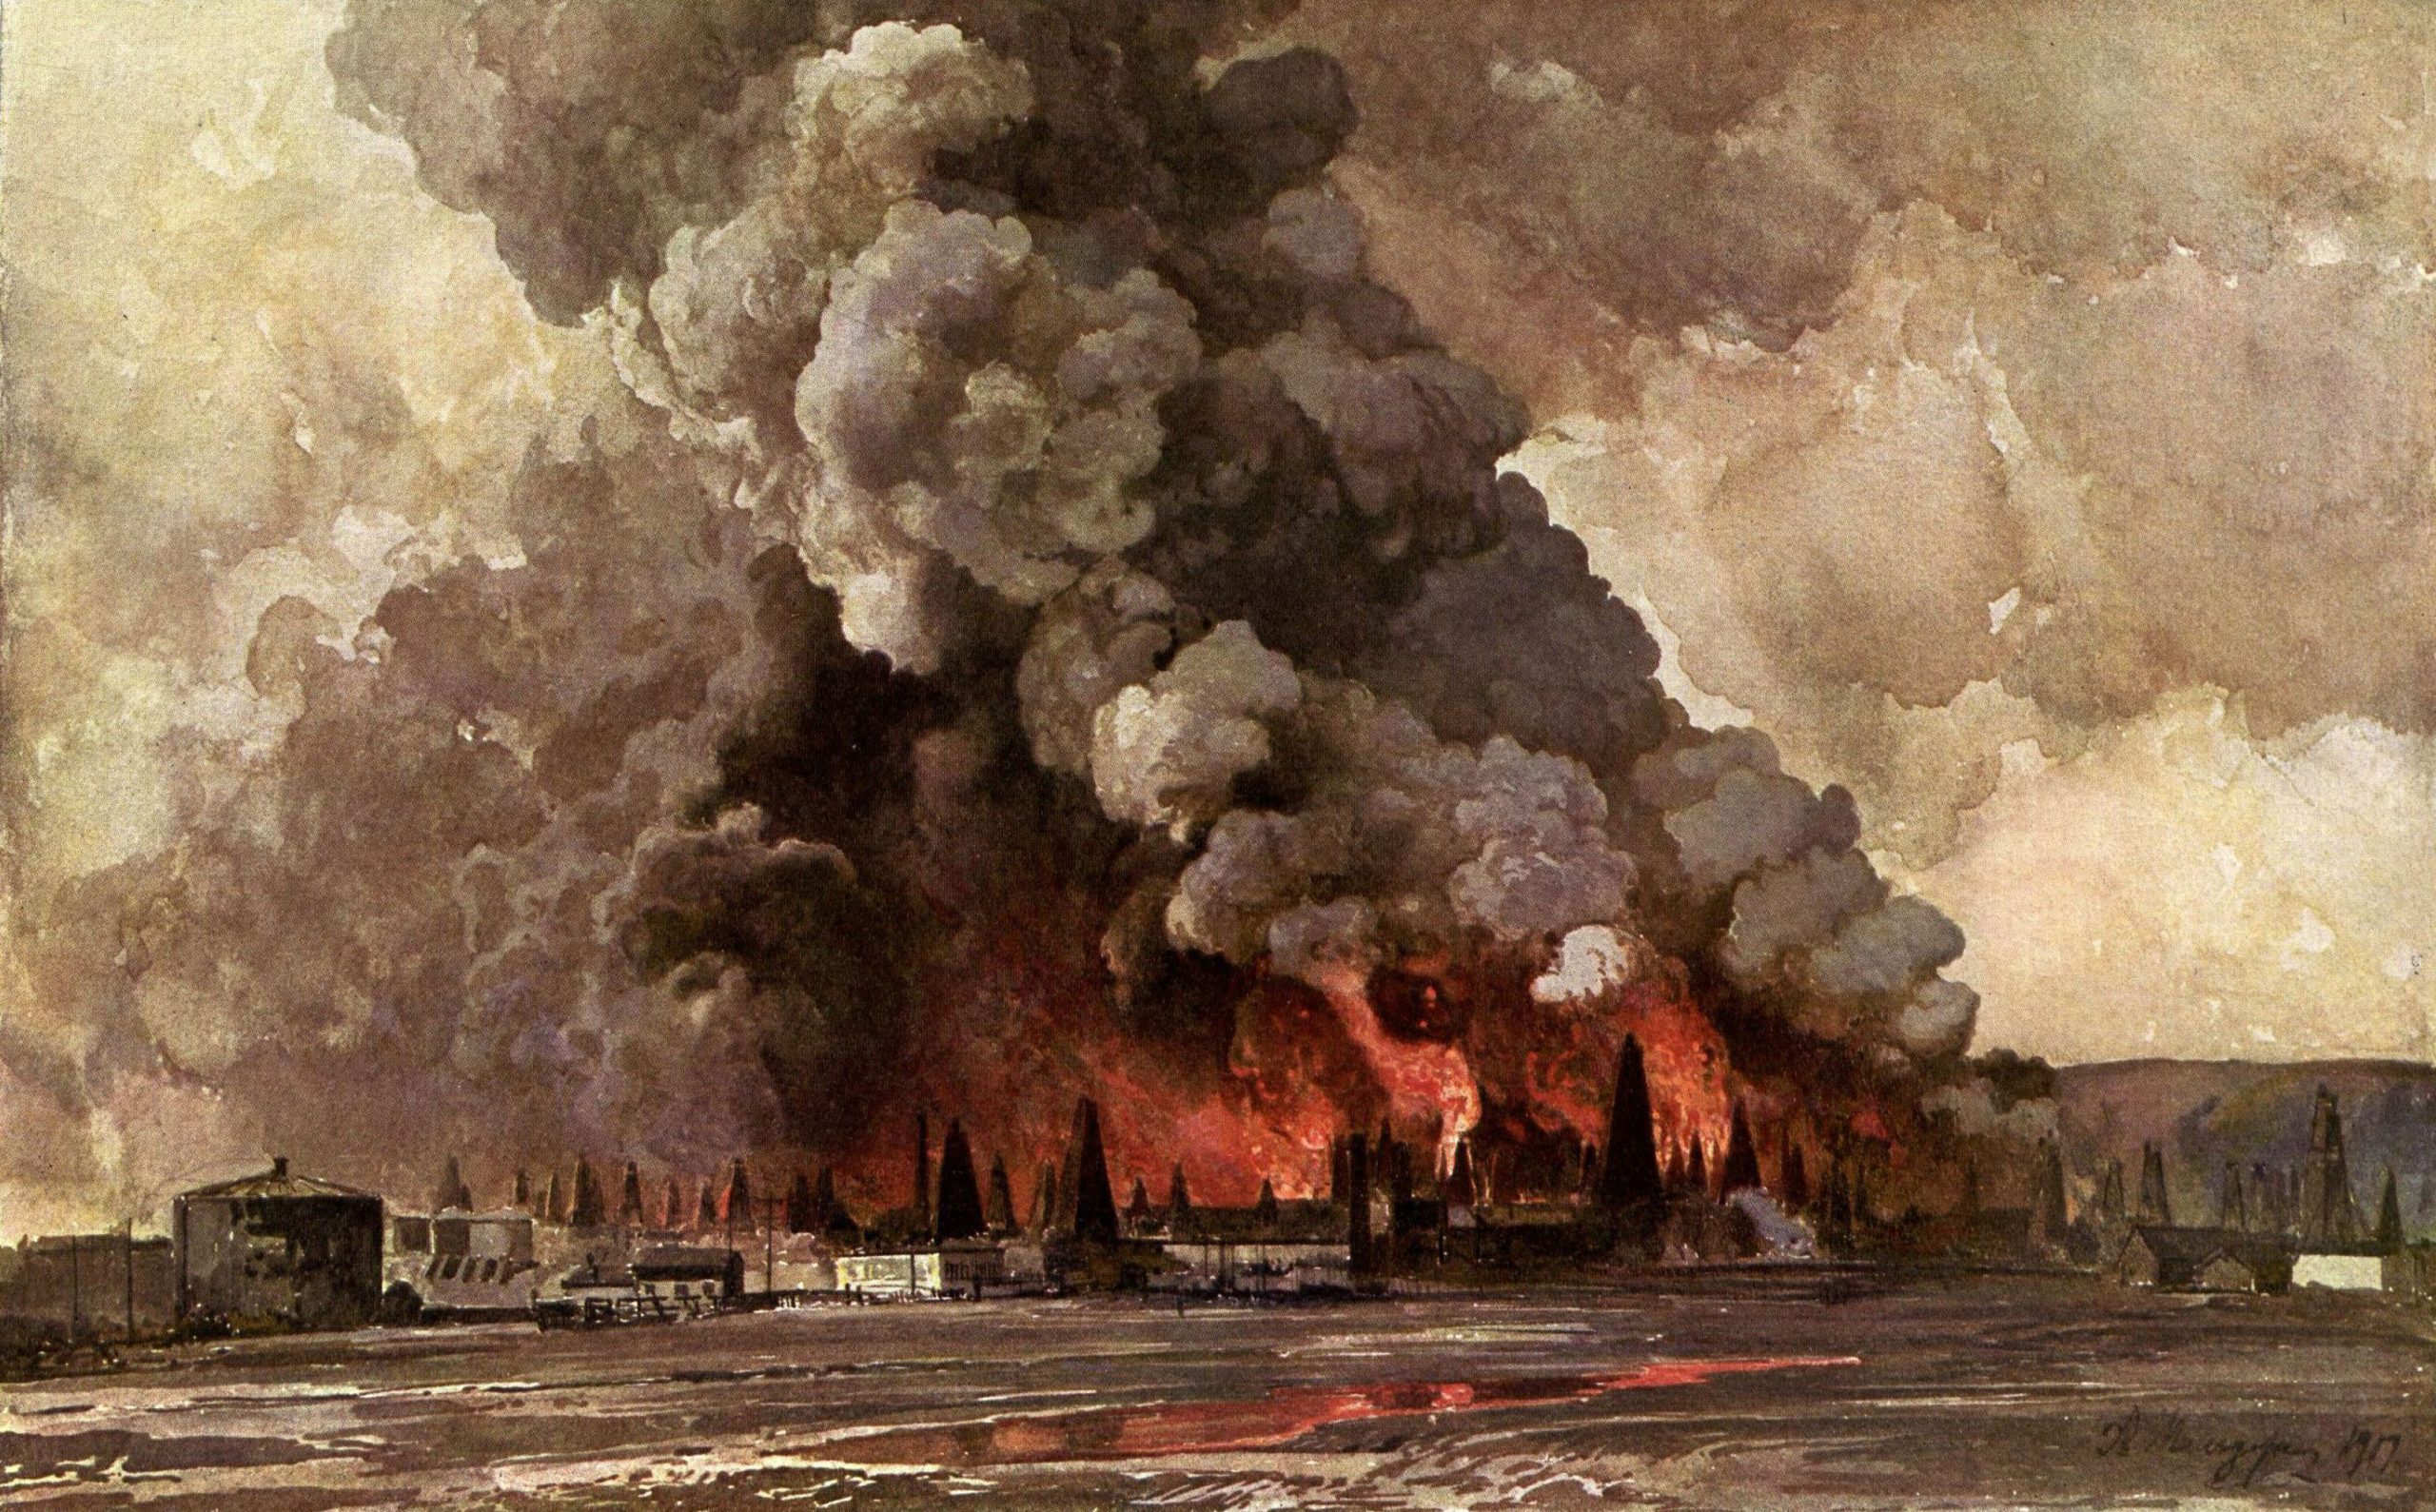 Fires at the oilfields in the Caucasus were just one of many consequences of the unrest after Bloody Sunday in St Petersburg in 1905.